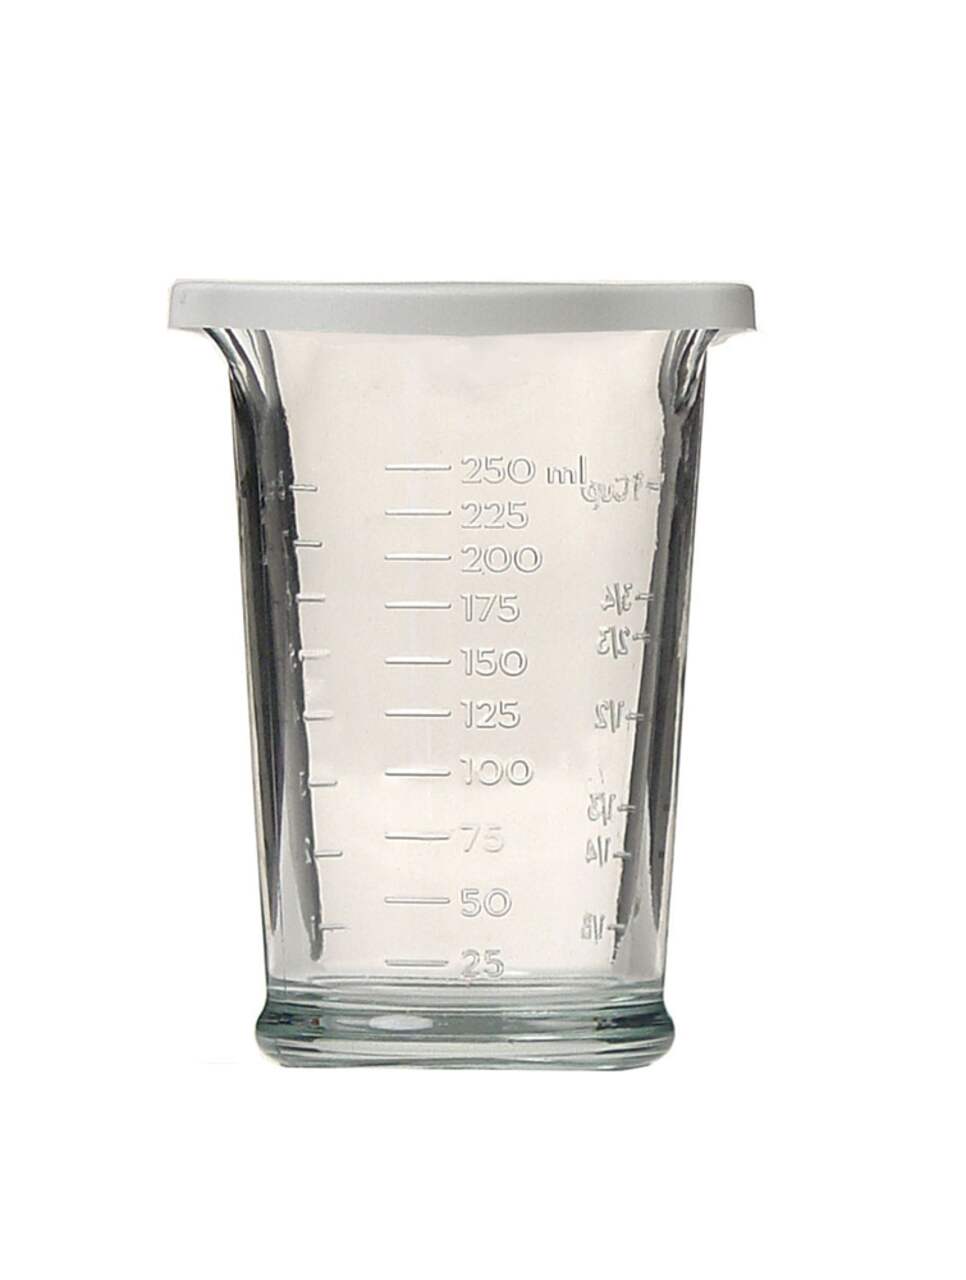 https://media-www.canadiantire.ca/product/living/kitchen/bakeware-baking-prep/0422548/anchor-hocking-triple-pour-measuring-cup-with-lid-43b2e9bc-578f-4457-804a-d2597d6ecaa2.png?imdensity=1&imwidth=640&impolicy=mZoom